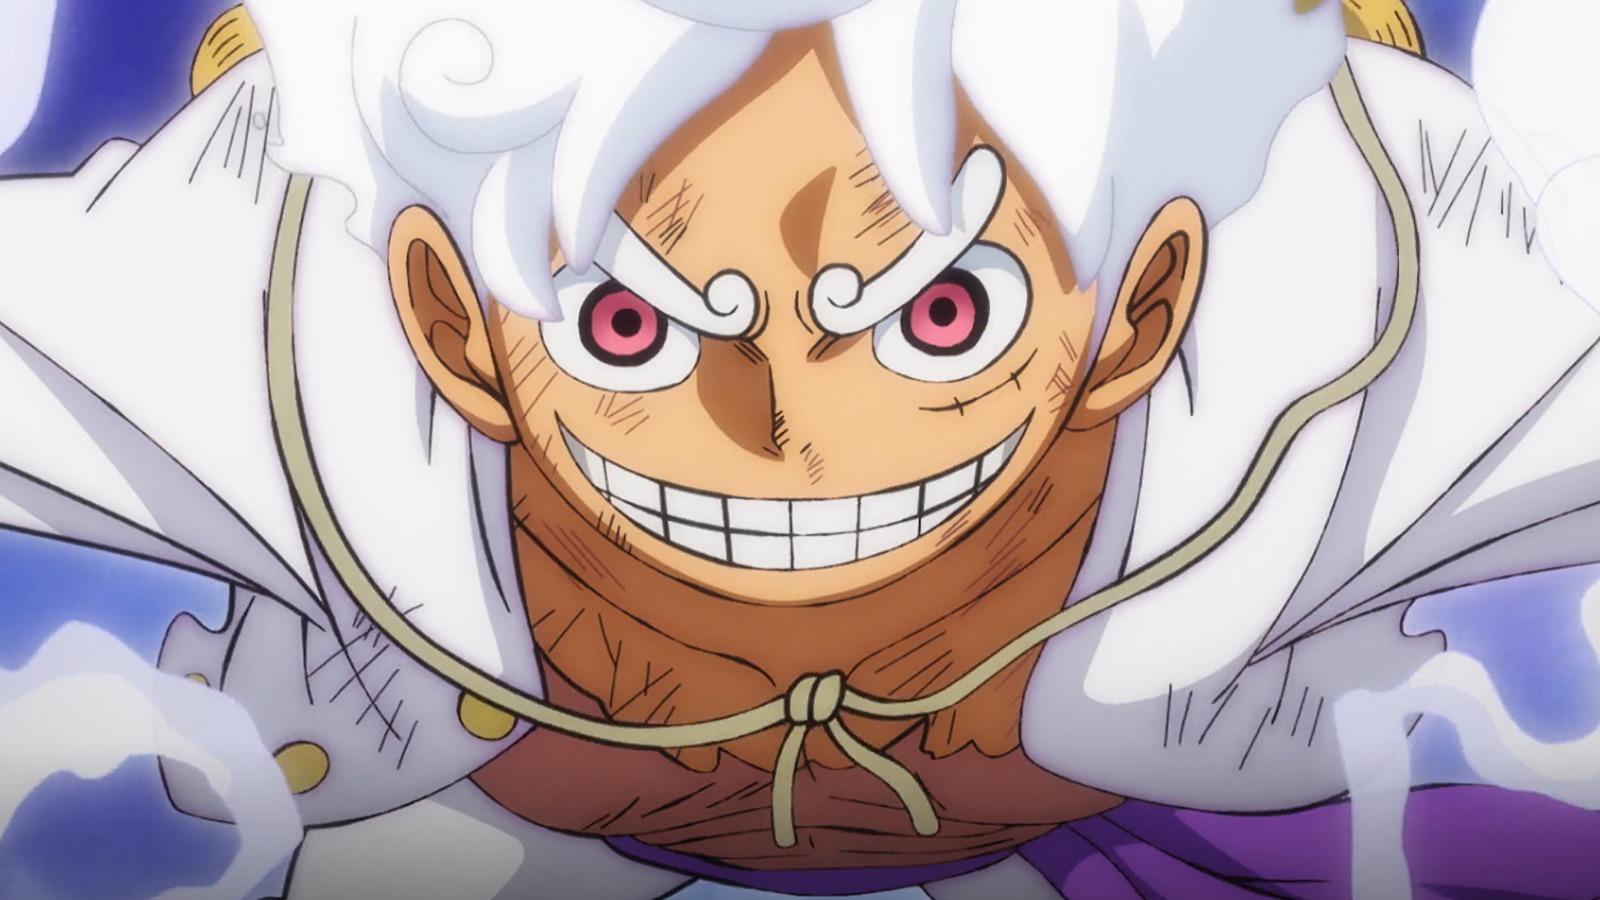 A still from One Piece Luffy in Gear 5 form